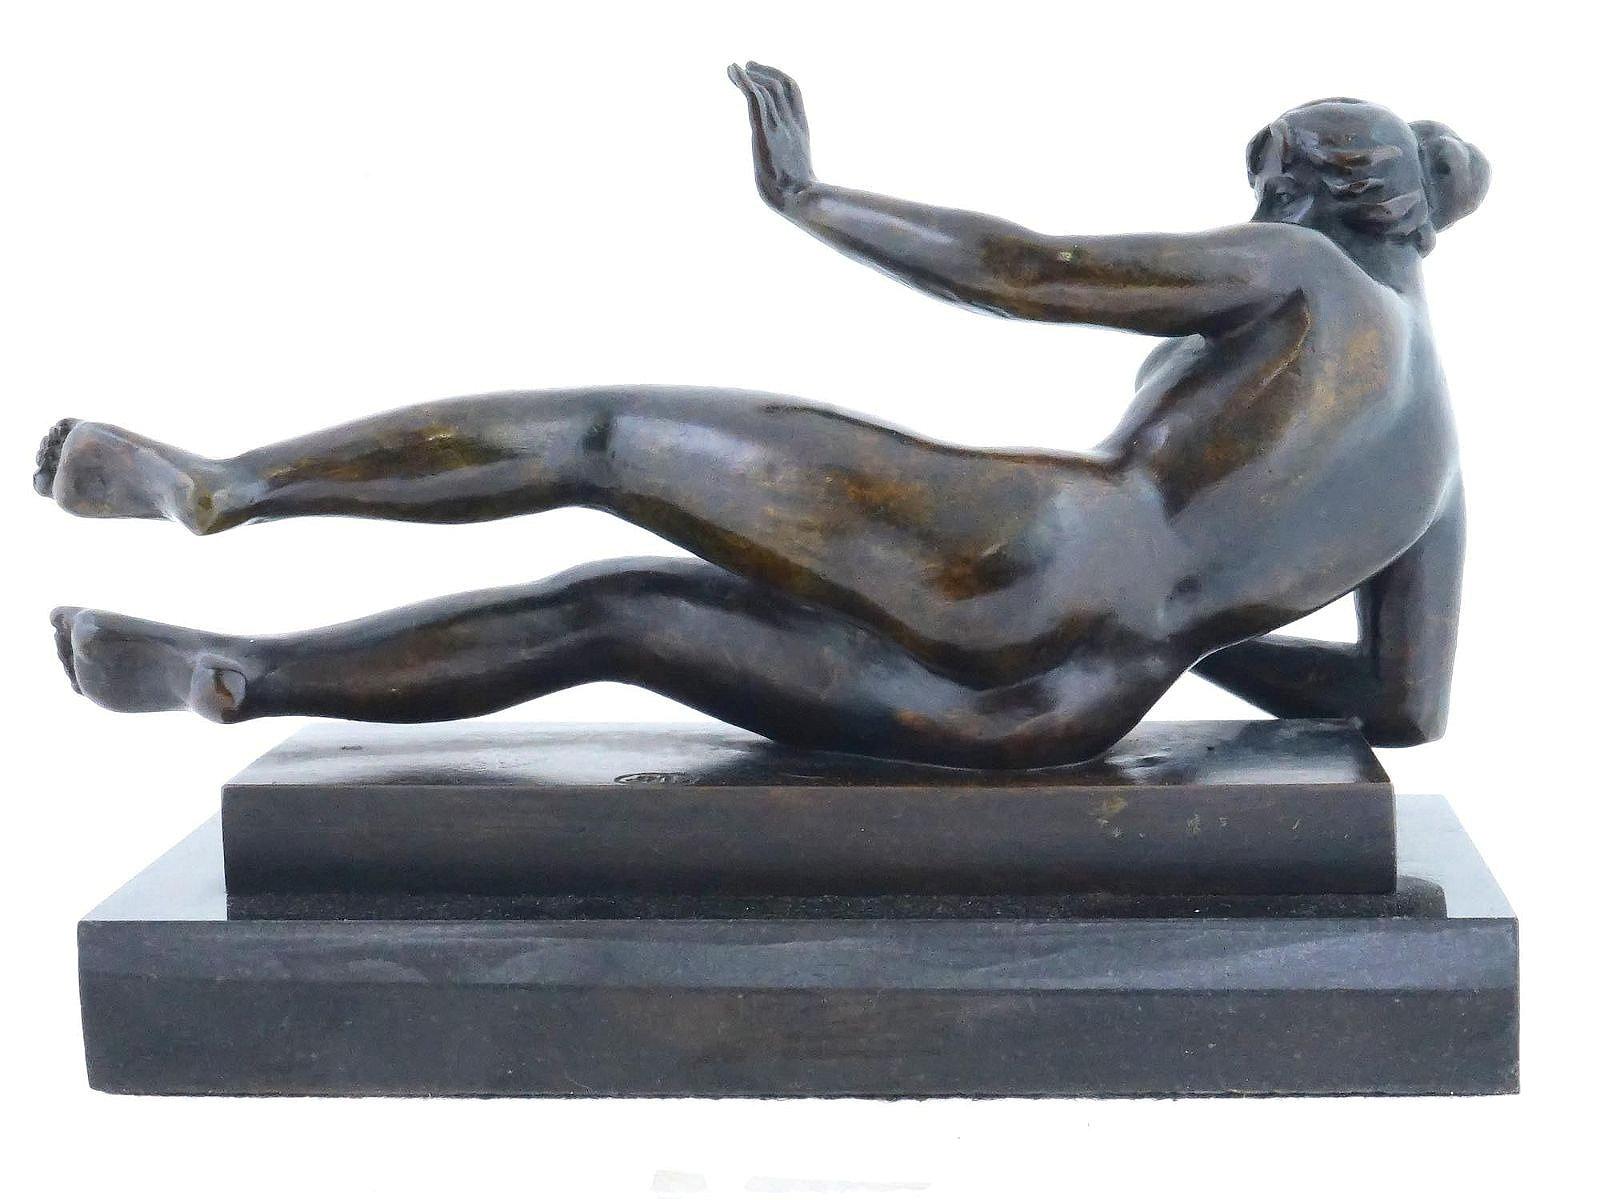 20th Century L'Air Bronze Sculpture After Aristide Maillol (1861-1944) For Sale